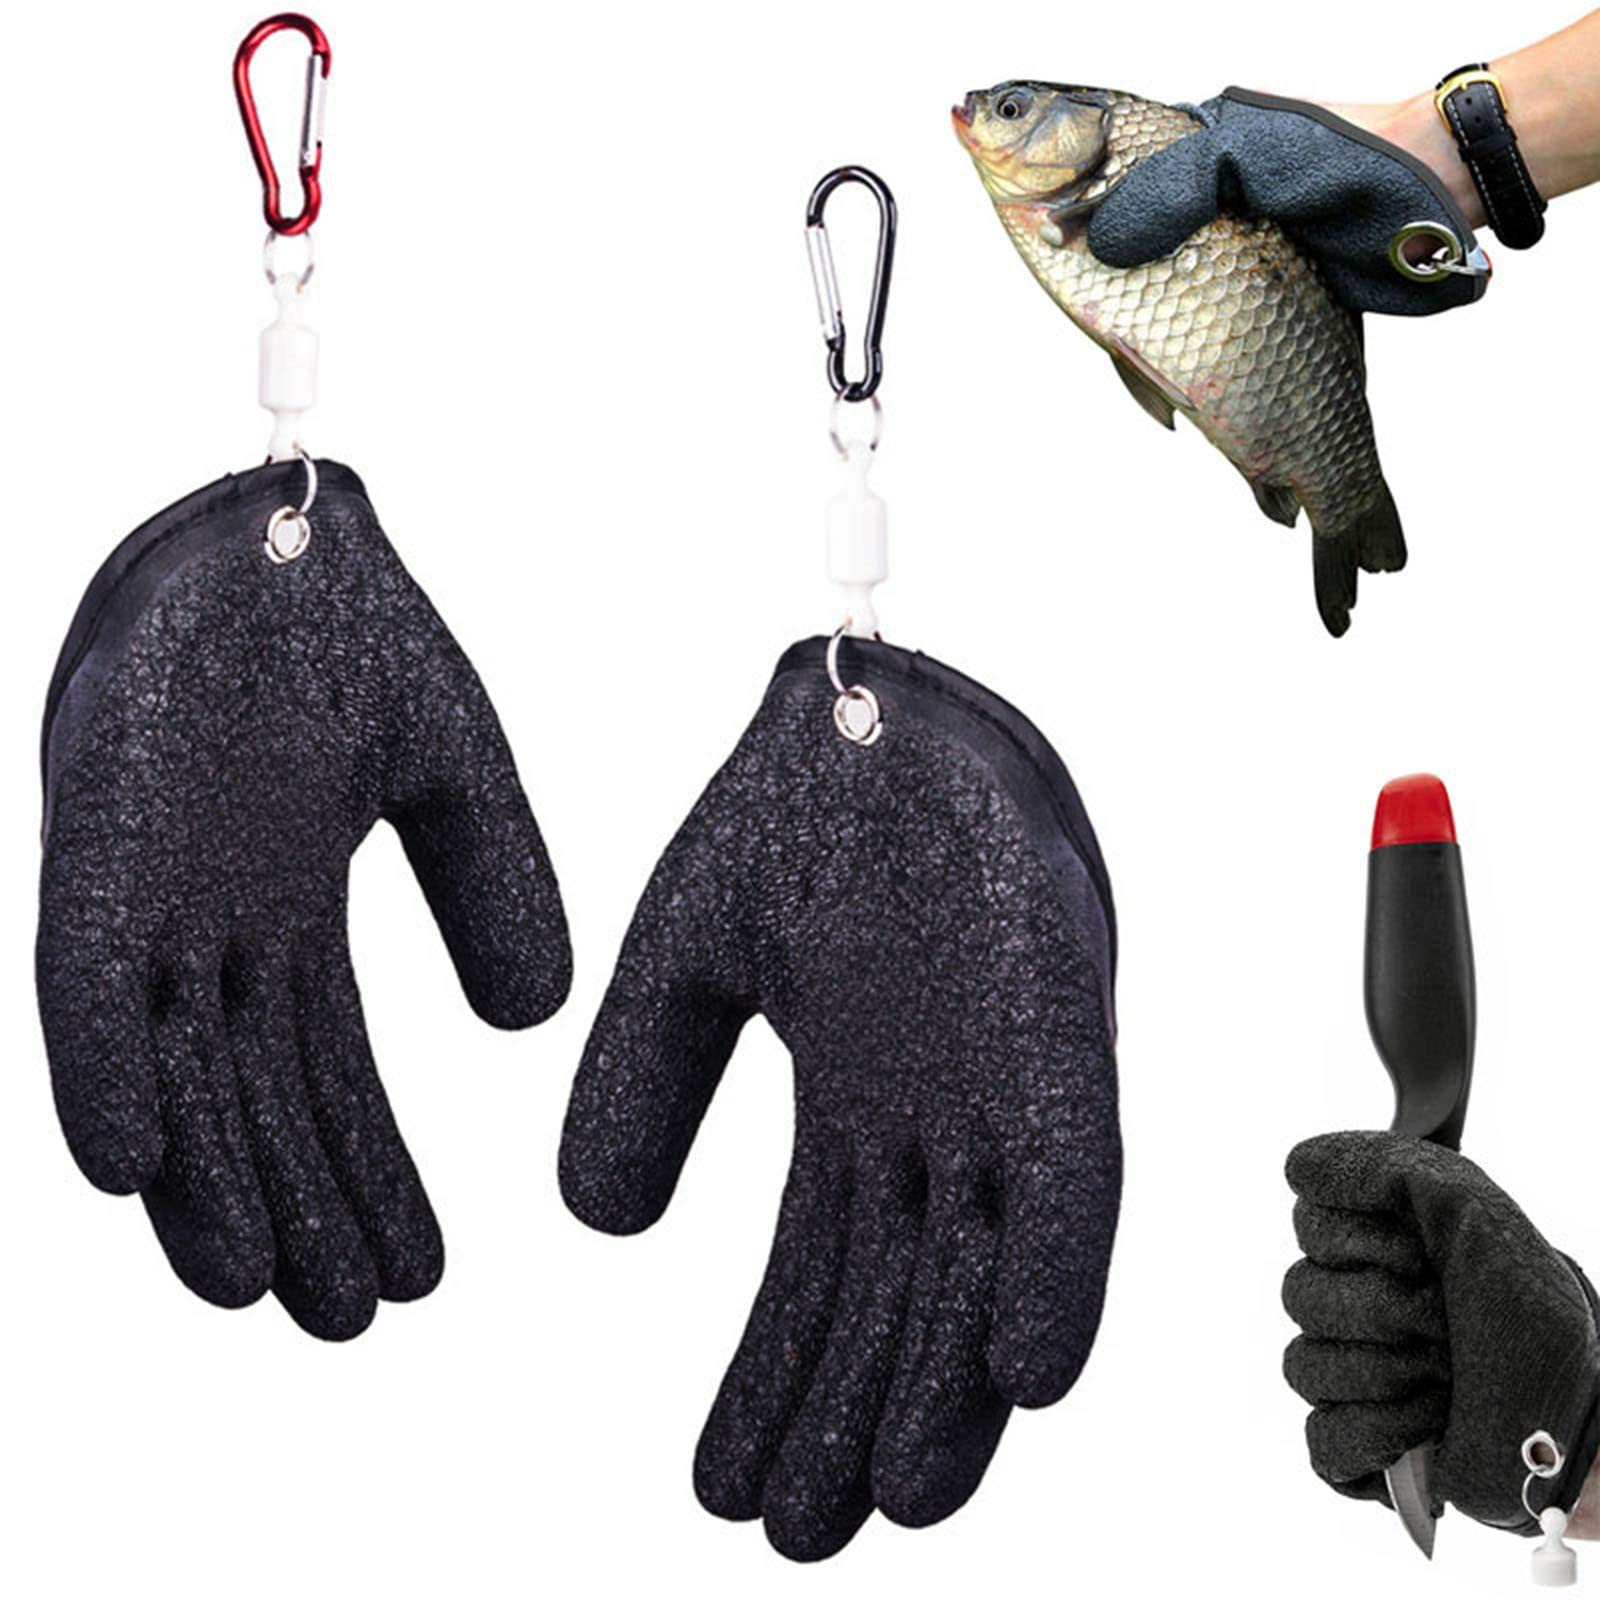 Fishing Gloves,Fishing Catching Gloves Non-Slip Fisherman Protect Hand   Fishing Gloves for Men and Women, Ideal for Ice Fishing, Winter Fishing, Or  Other Outdoor Winter Sports Tregoo, Fishing Gloves -  Canada